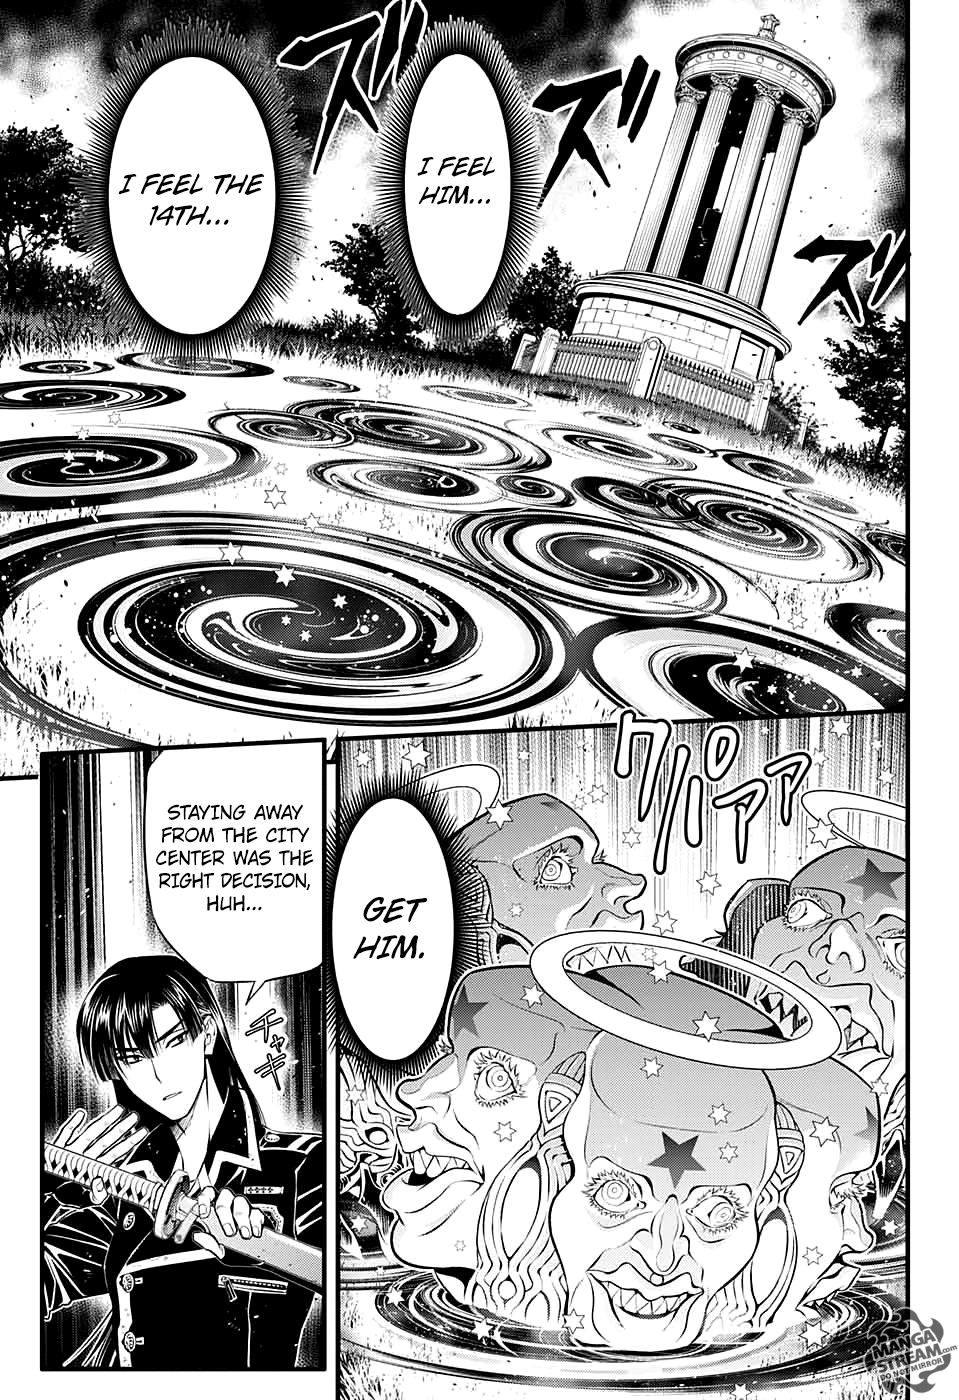 D.Gray-man chapter 231 page 19